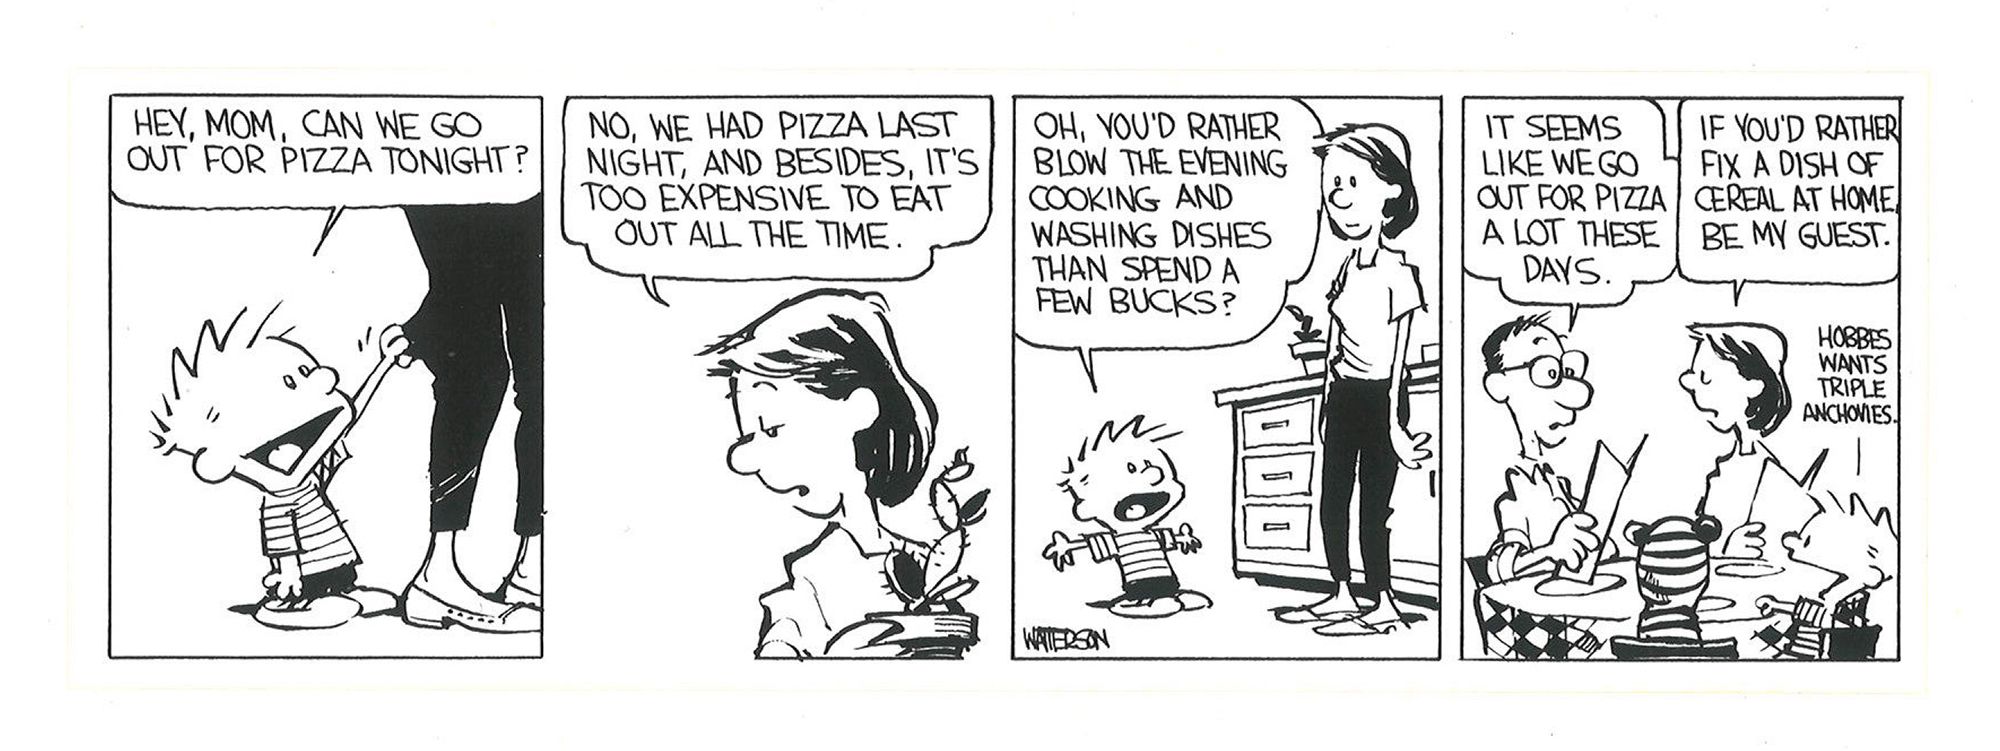 Calvin and Hobbes comic where Calvin convinces his mom to go out for dinner